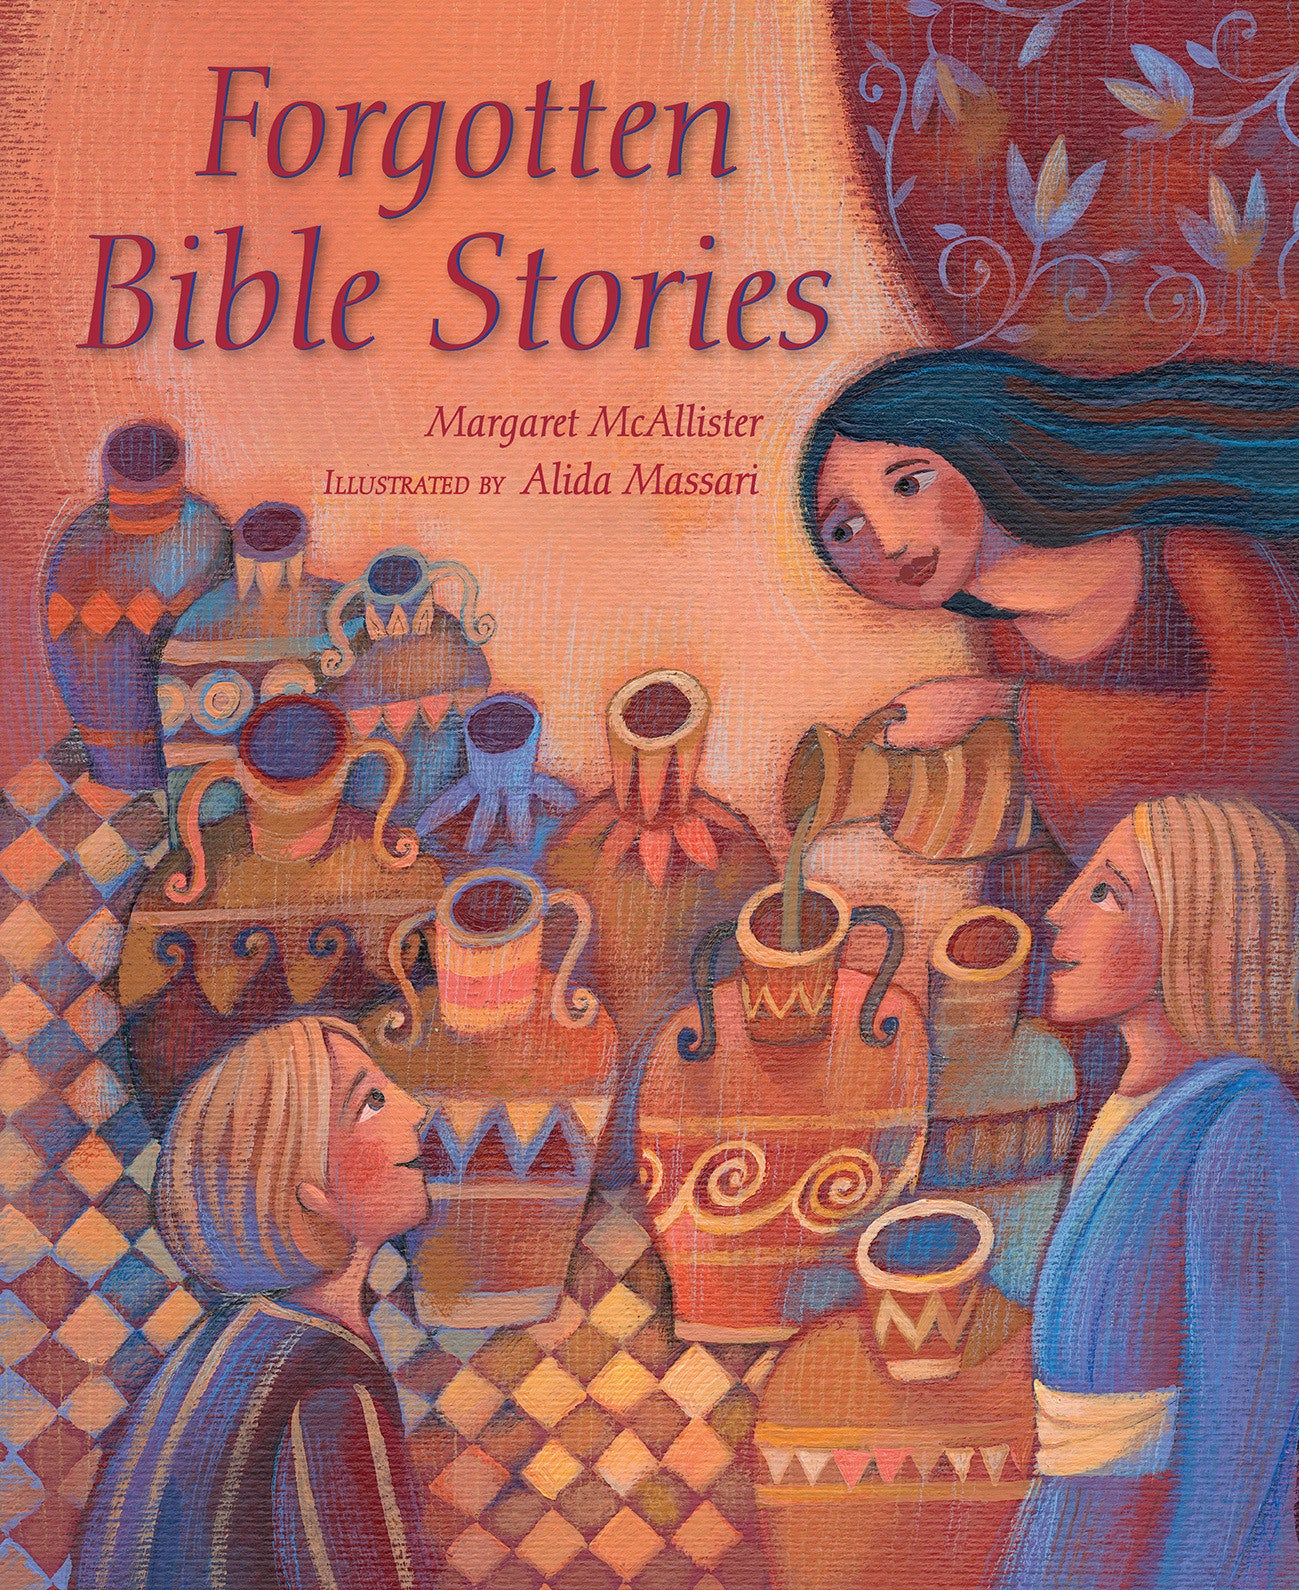 Image of Forgotten Bible Stories other